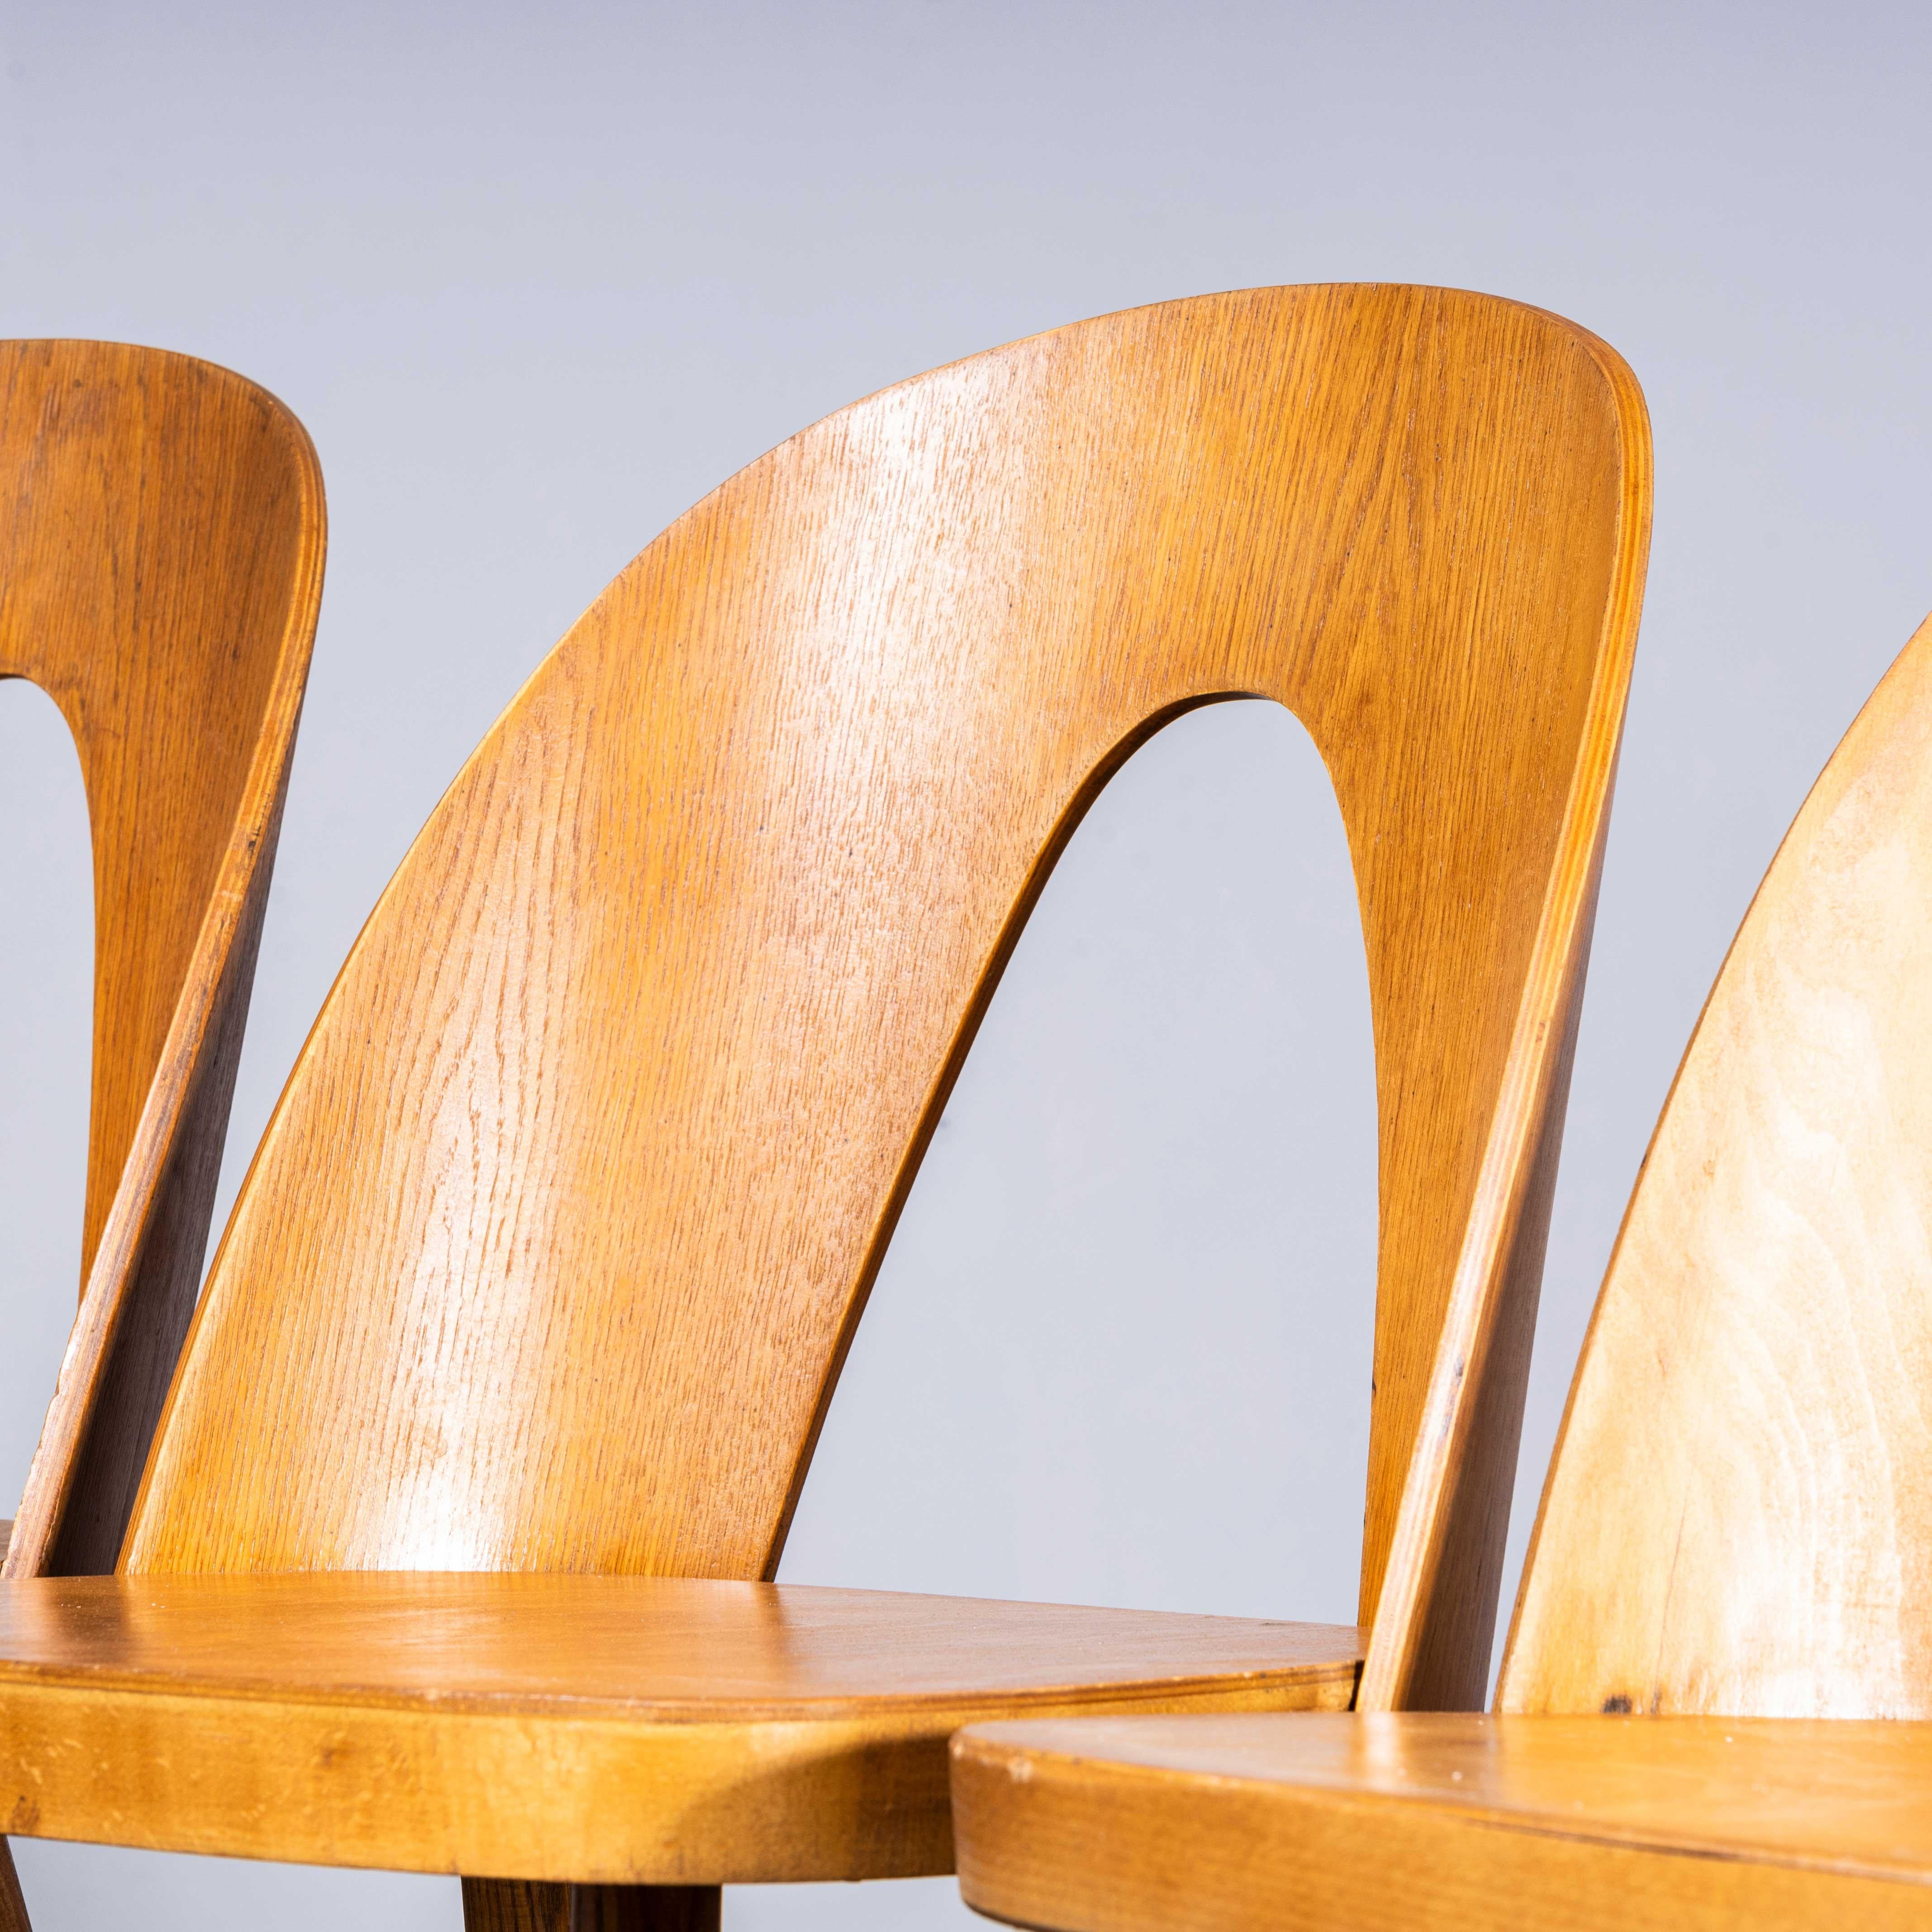 1960’s Dining Chairs By Antonin Suman For Ton – Set Of Four
1960’s Dining Chairs By Antonin Suman For Ton – Set Of Four. Antonin Suman joined Thonet in 1949 and later moved to the Thonet offshoot Ton when the firms split during the post-war